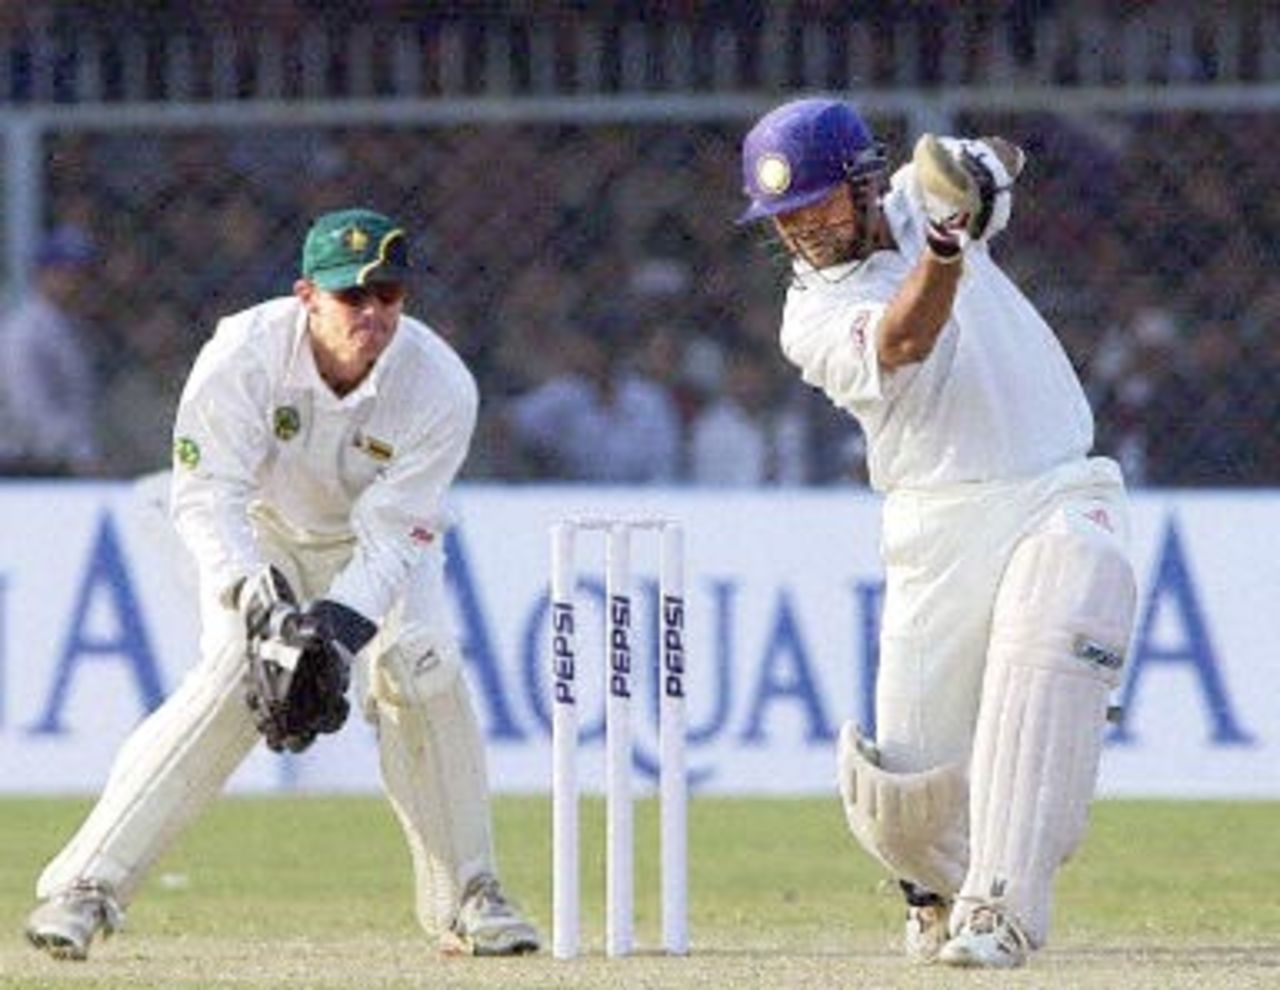 Indian star batsman Sachin Tendulkar (R) hits a delivery off Zimbabwe bowler Brian Murphy (not in picture) as Zimbabwean wicketkeeper Andy Flower (L) looks on during the fourth one-day cricket match in Kanpur, 11 December 2000. India won the match by nine wickets to take the series 3-1.